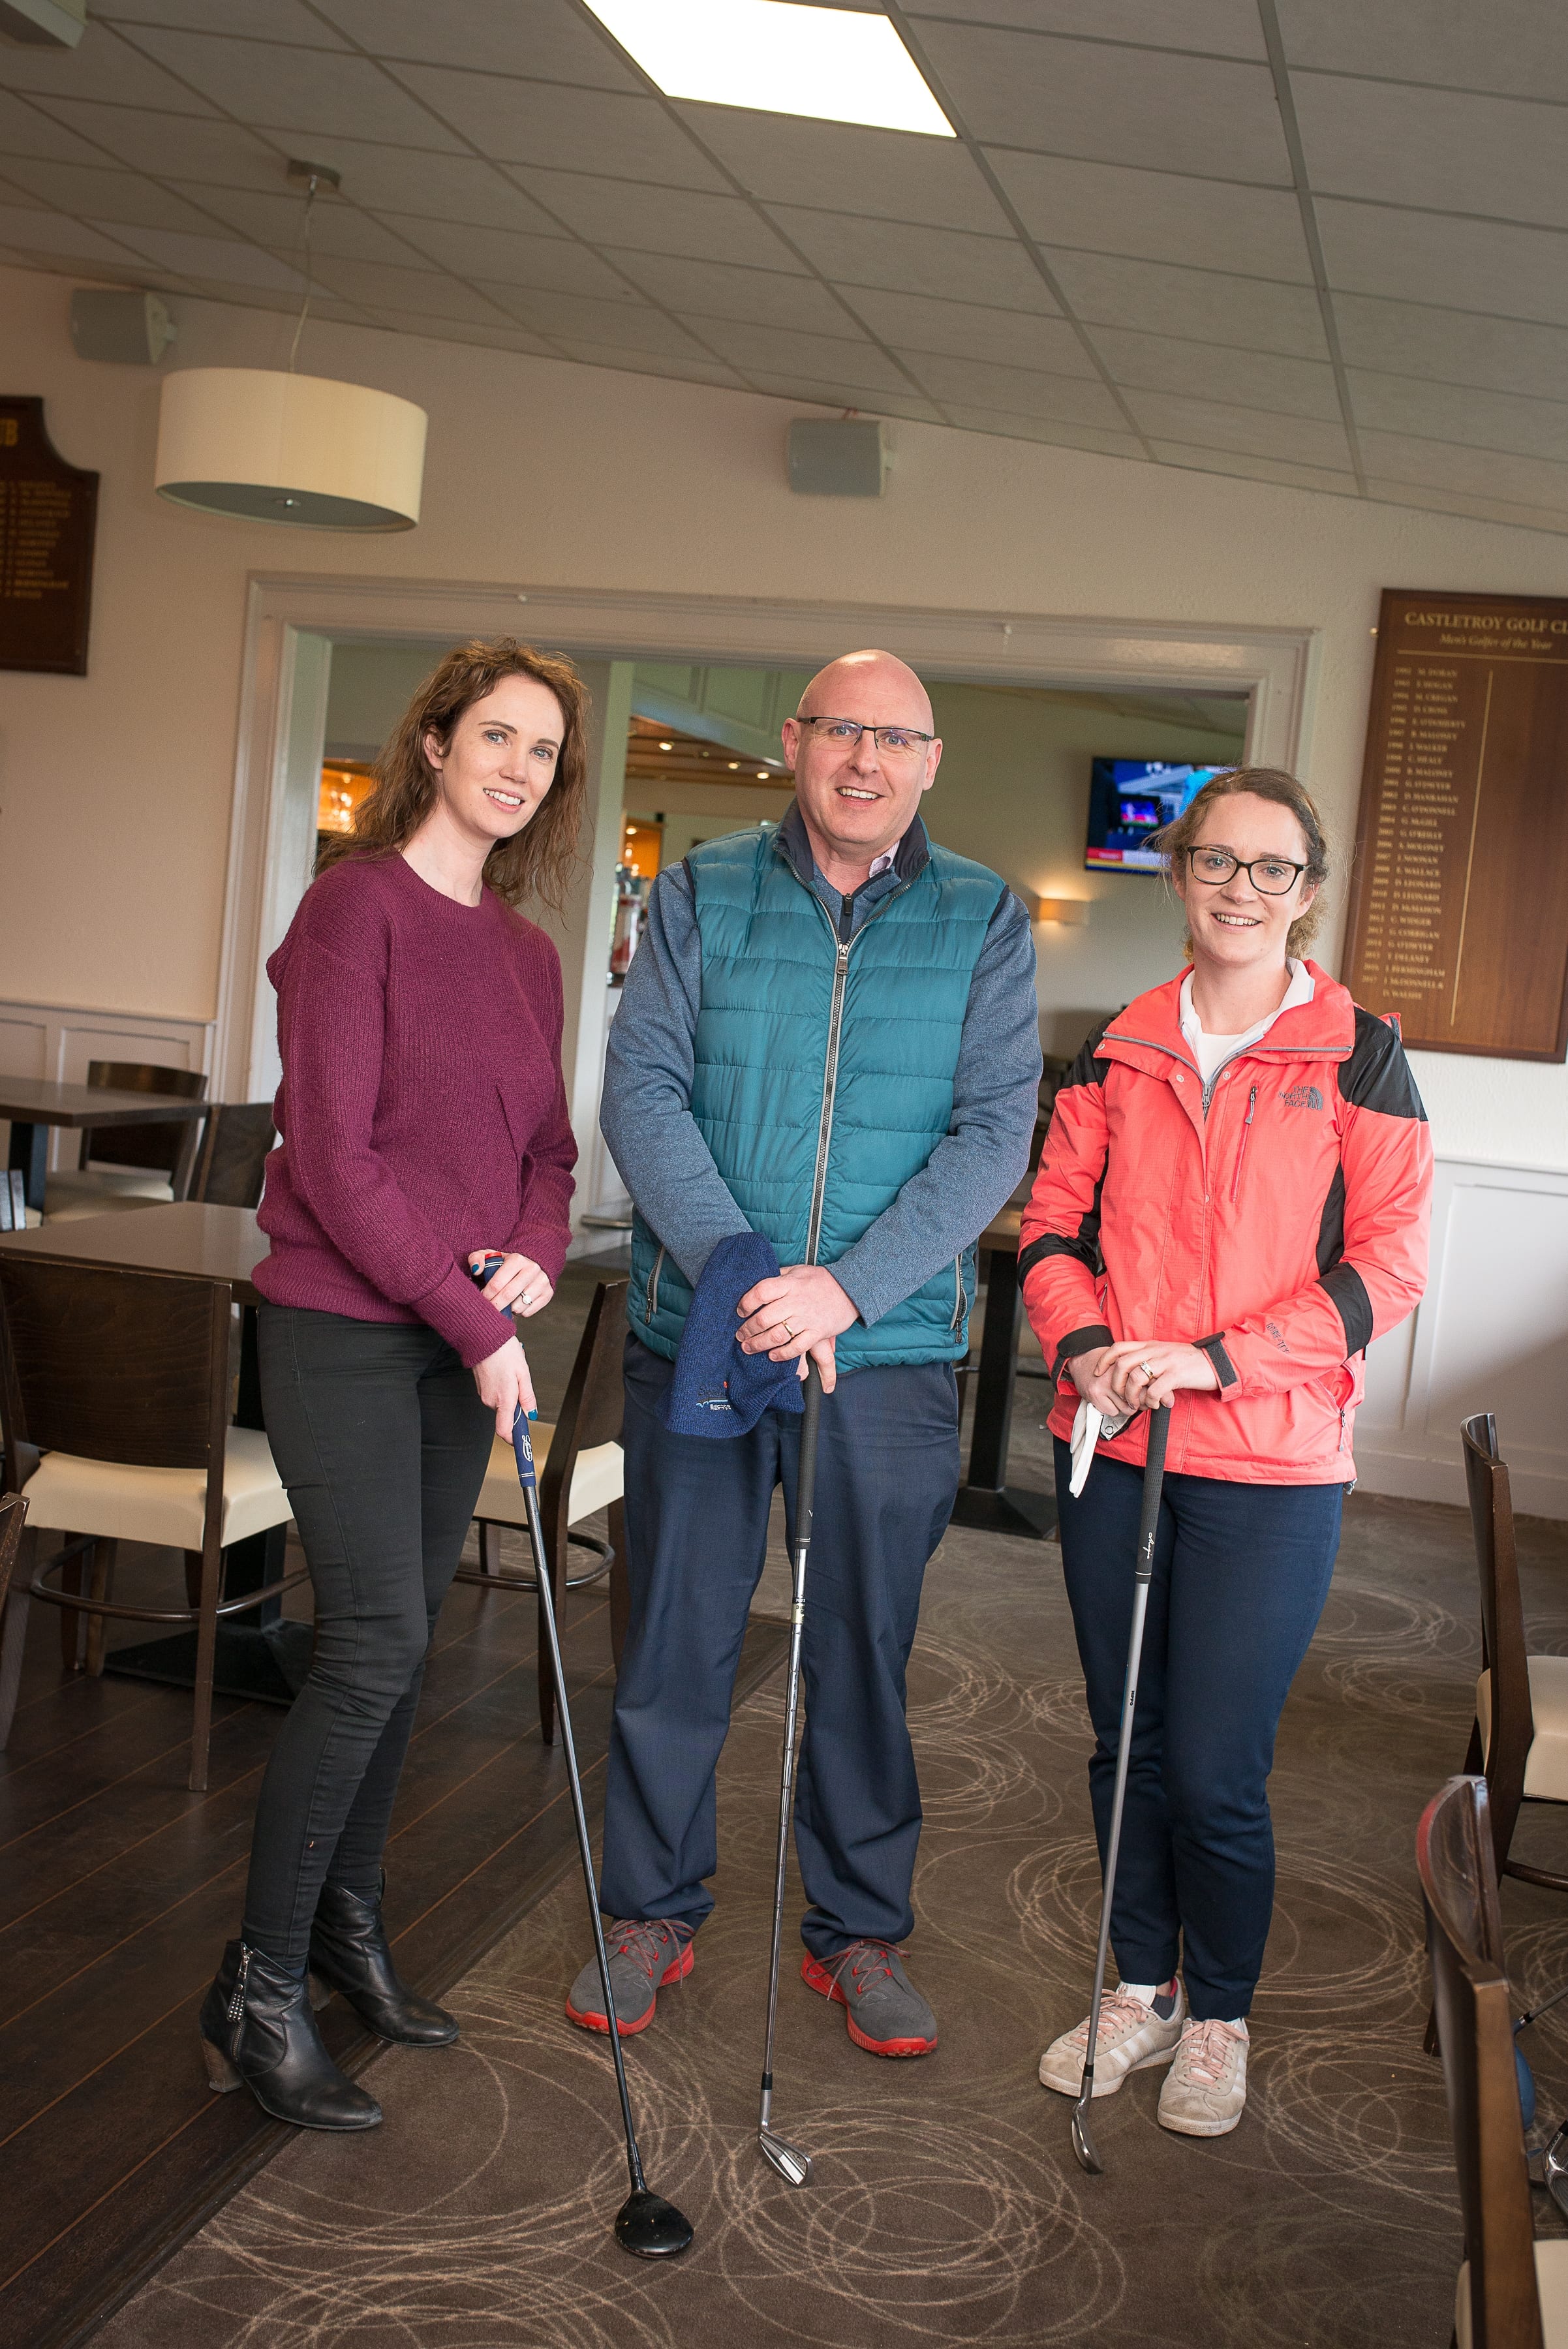 Limerick Chamber Go Golfing for Business Series
in association with the Castletroy Golf Club which took place in the Castletroy Golf Club  on Thursday 7th March 2019:  From left to right: Mary McNamee- Limerick Cha,her, Vincent Hely - Action Point, Maeve Kiely - Laya Healthcare 
Image by Morning Star Photography